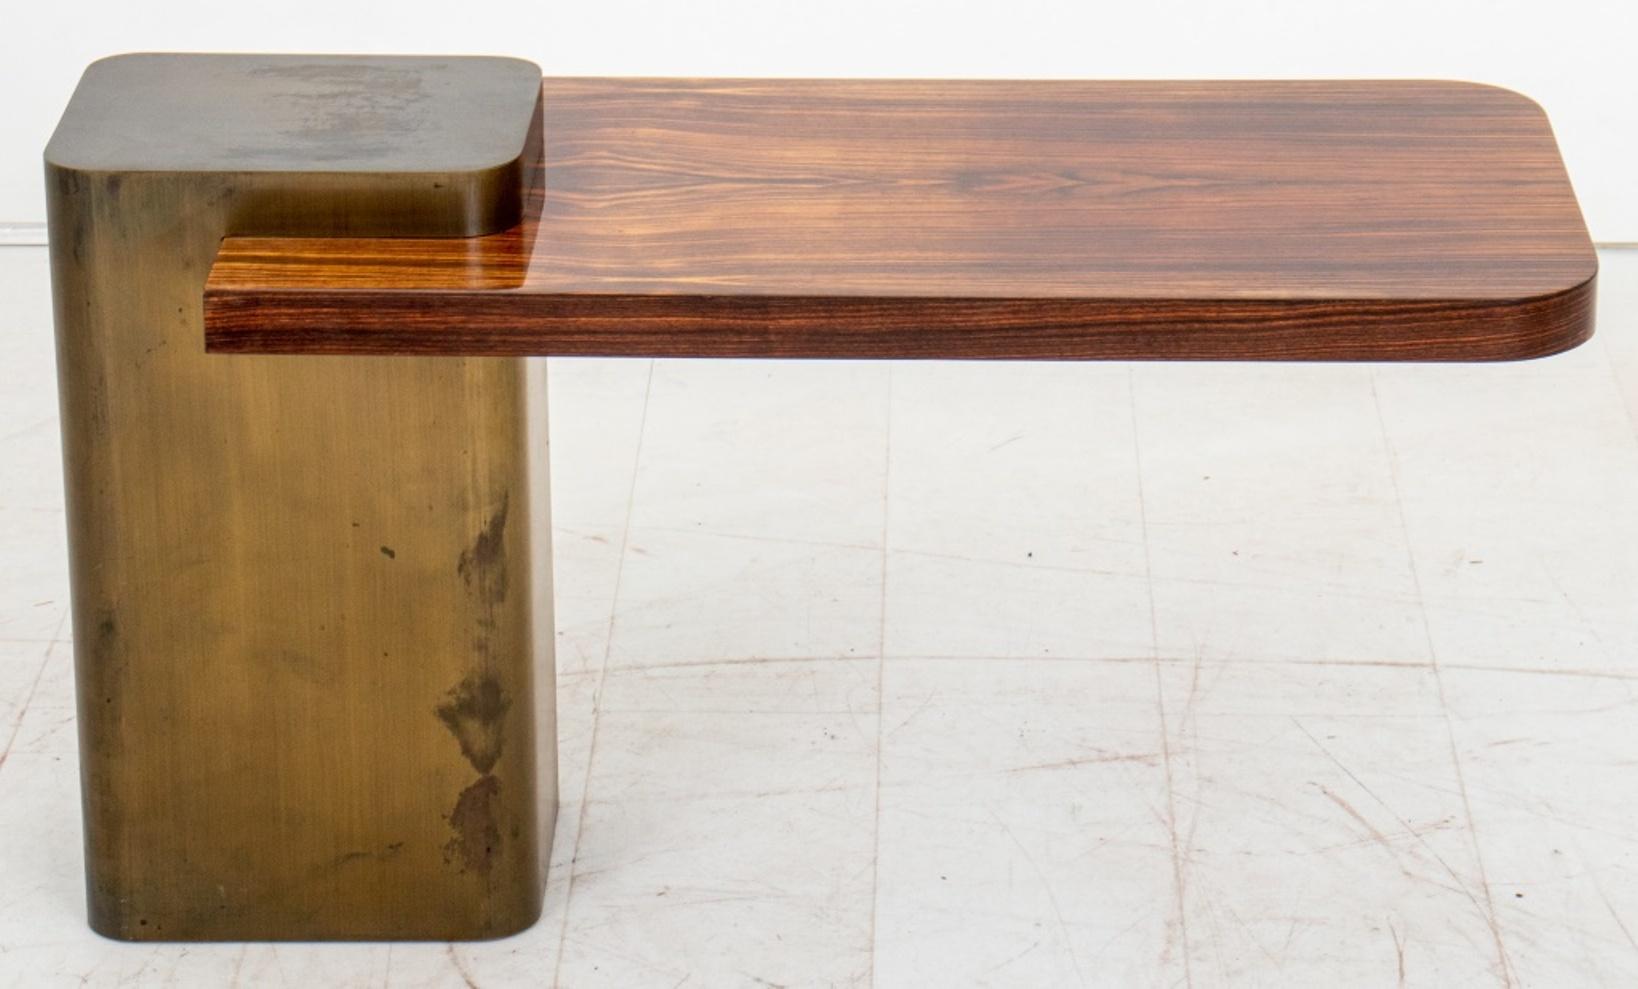 John Fischer Furniture Karl Springer style cantilevered side table with Madagascar Ebony surface mounted to a bronze base at one end. 
Provenance: Property From a Thad Hayes Designed Apartment Featured in Architectural Digest, February,